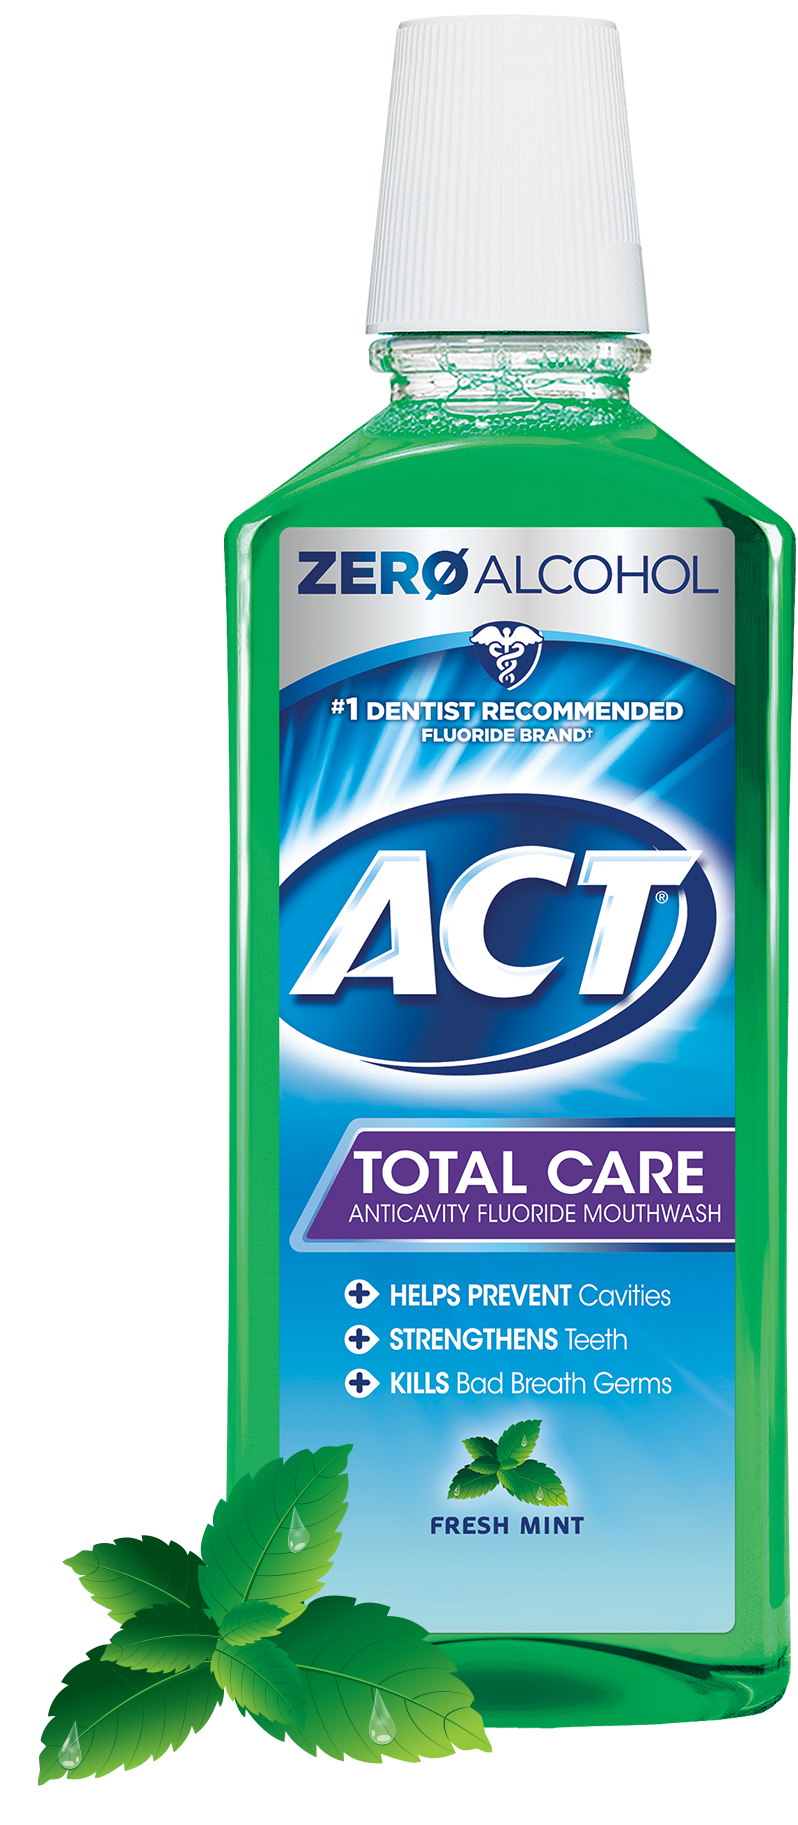 ACT® Total Care Anticavity Fluoride Mouthwash